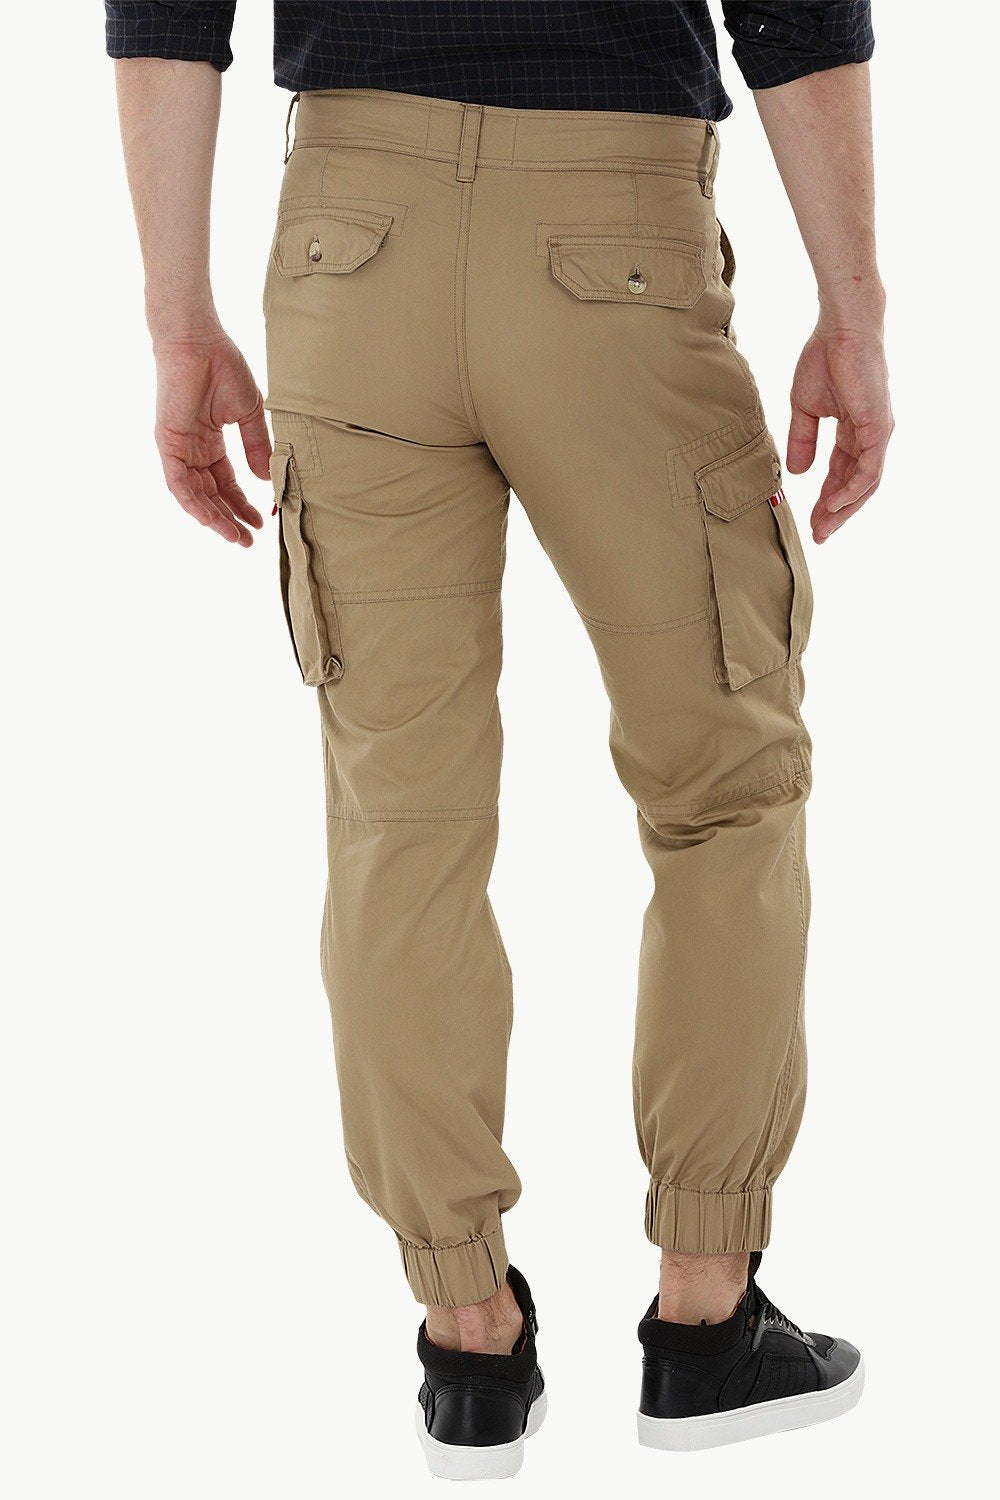 Buy Online Twill Cuff Jogger Cargo Pants Online at Zobello